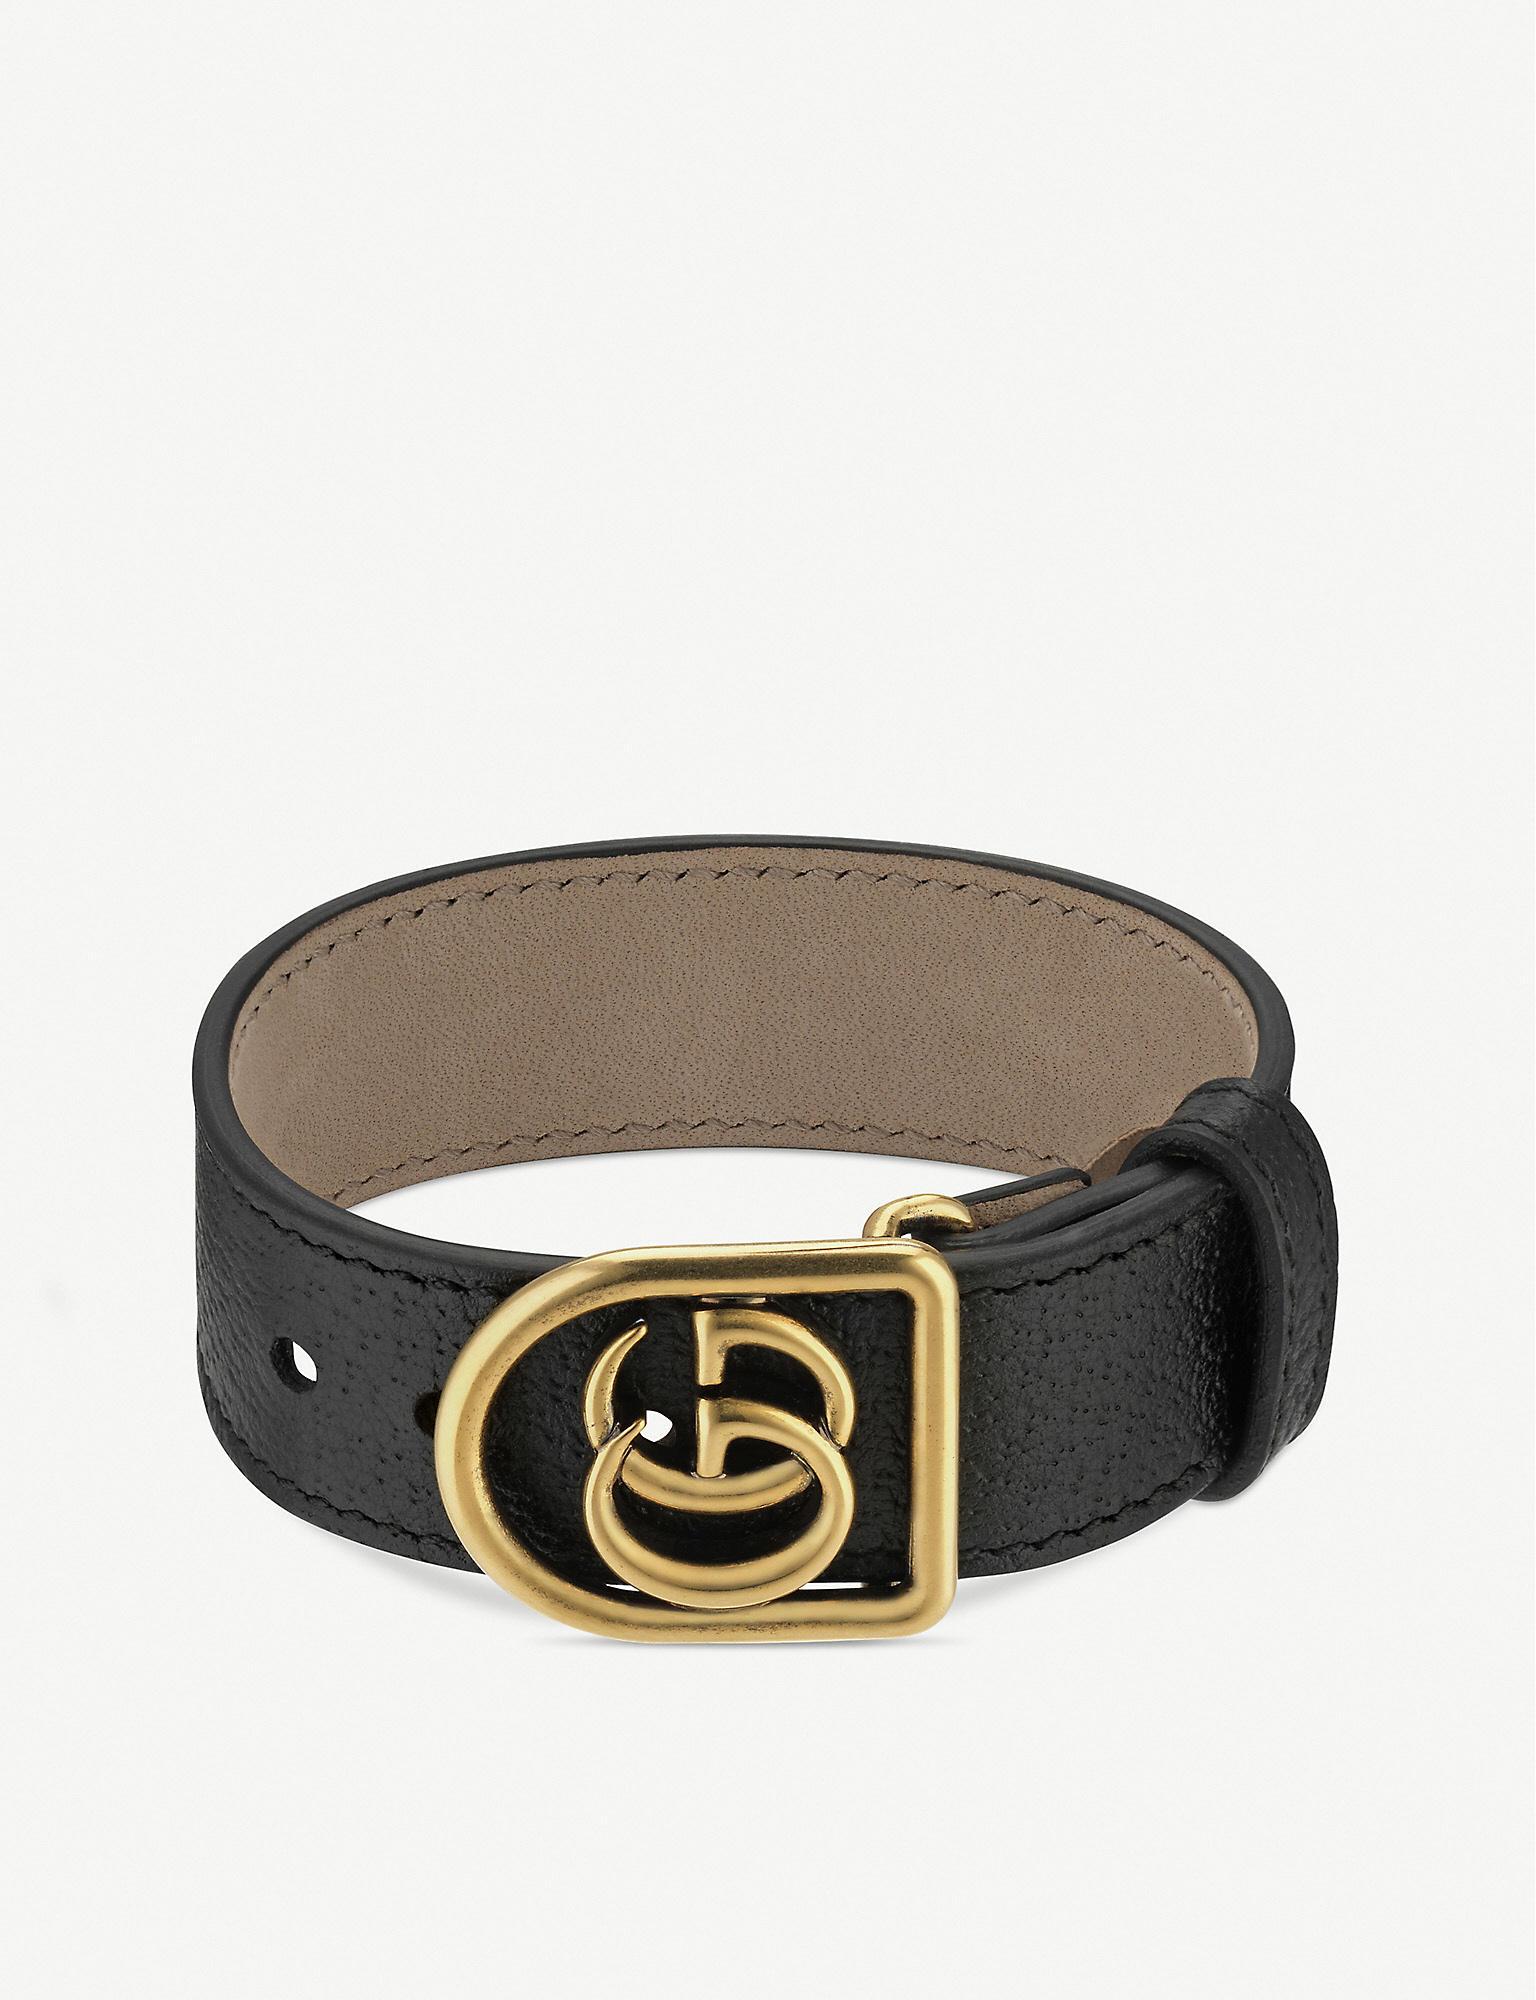 Share more than 53 gucci leather bracelet womens latest